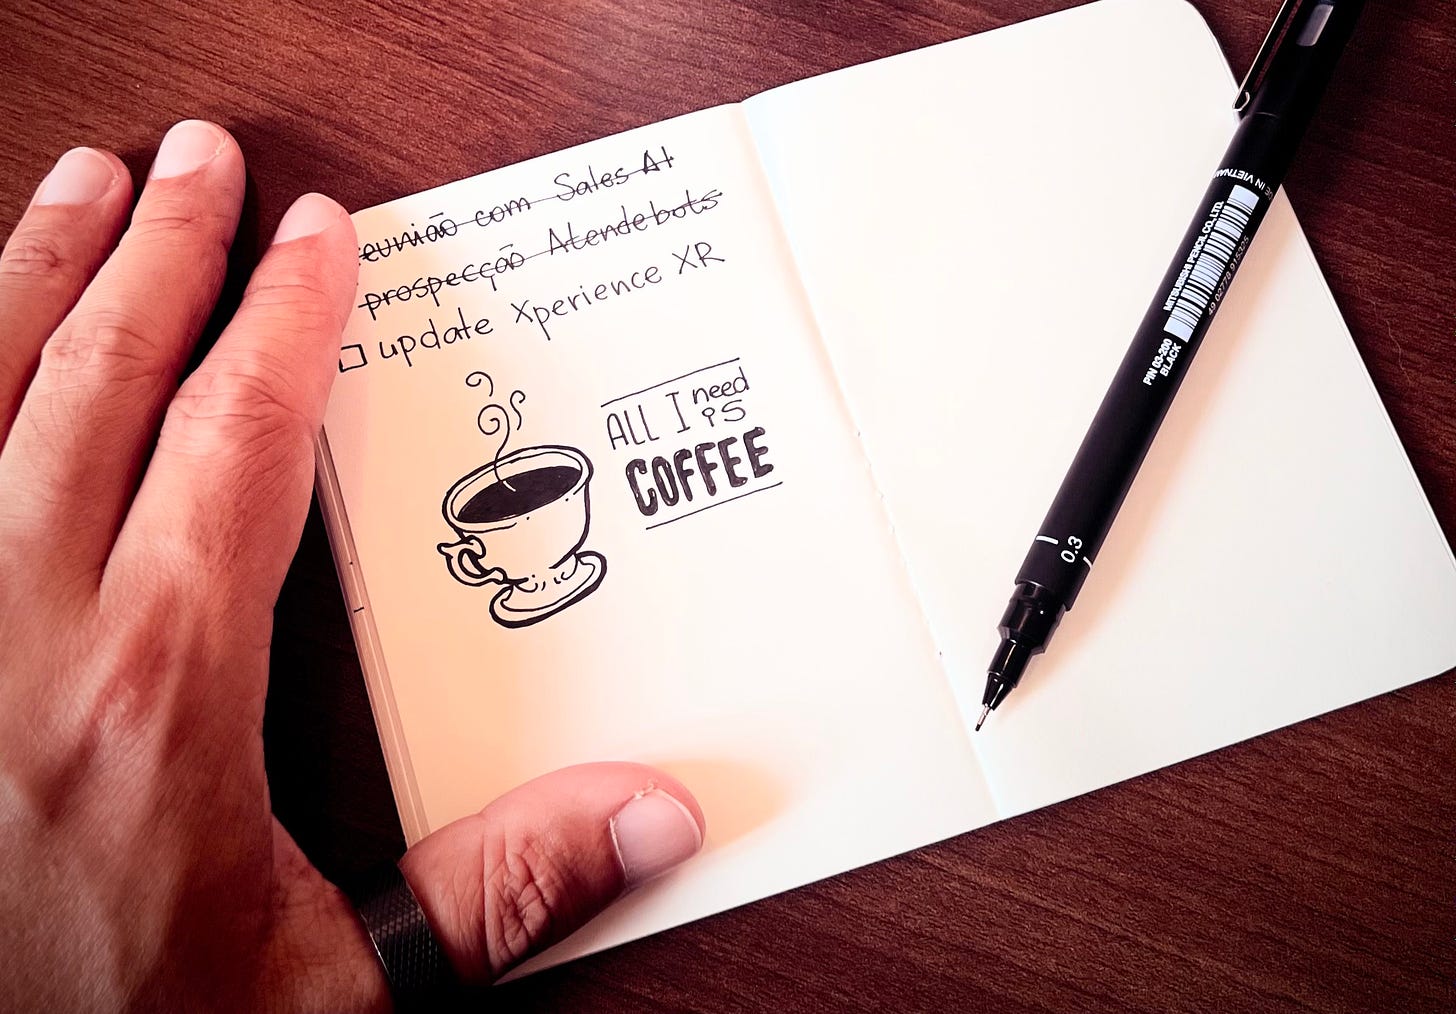  A person's hand rests on a wooden desk next to an open notebook displaying handwritten notes and a whimsical drawing of a coffee cup with the phrase "ALL I need IS COFFEE." A fine-tip black ink pen lies adjacent to the notebook.